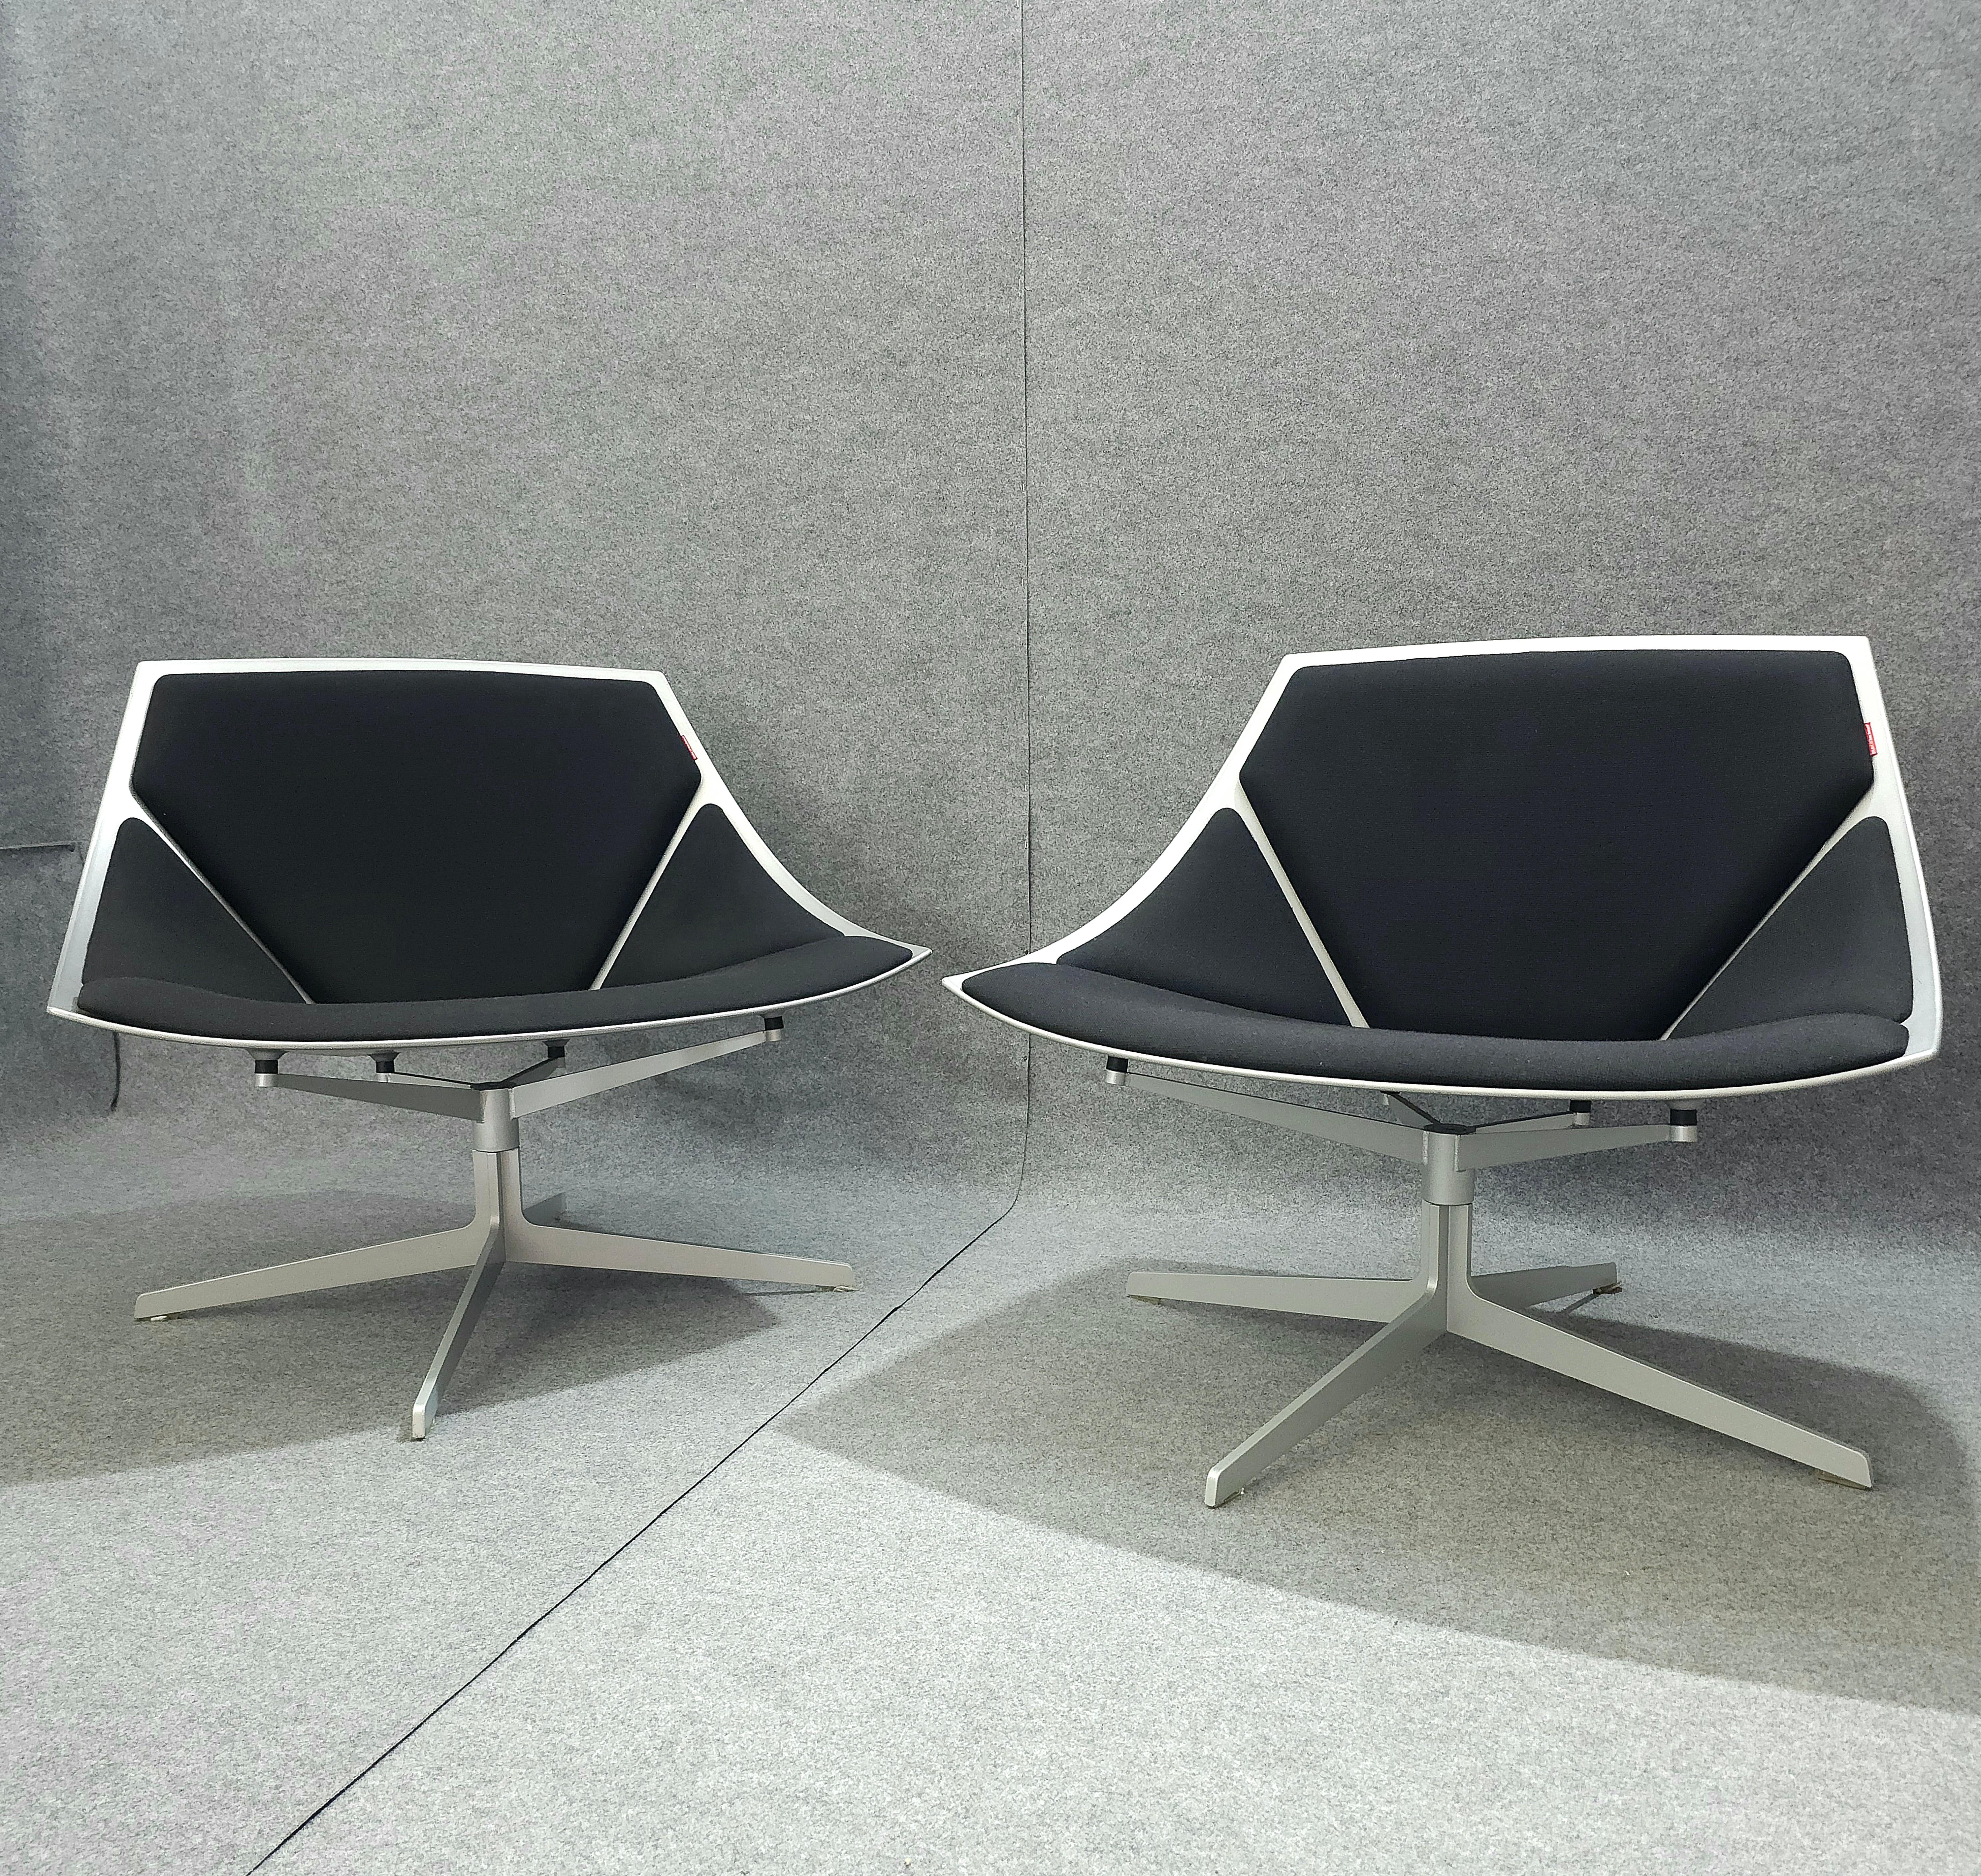 Set of 2 anatomically shaped swivel armchairs/chairs produced in Denmark in the 2000s. Each armchair/chair was made with a plastic structure, quadripod support in steel, curved seat and backrest with fabric upholstery in shades of black. We